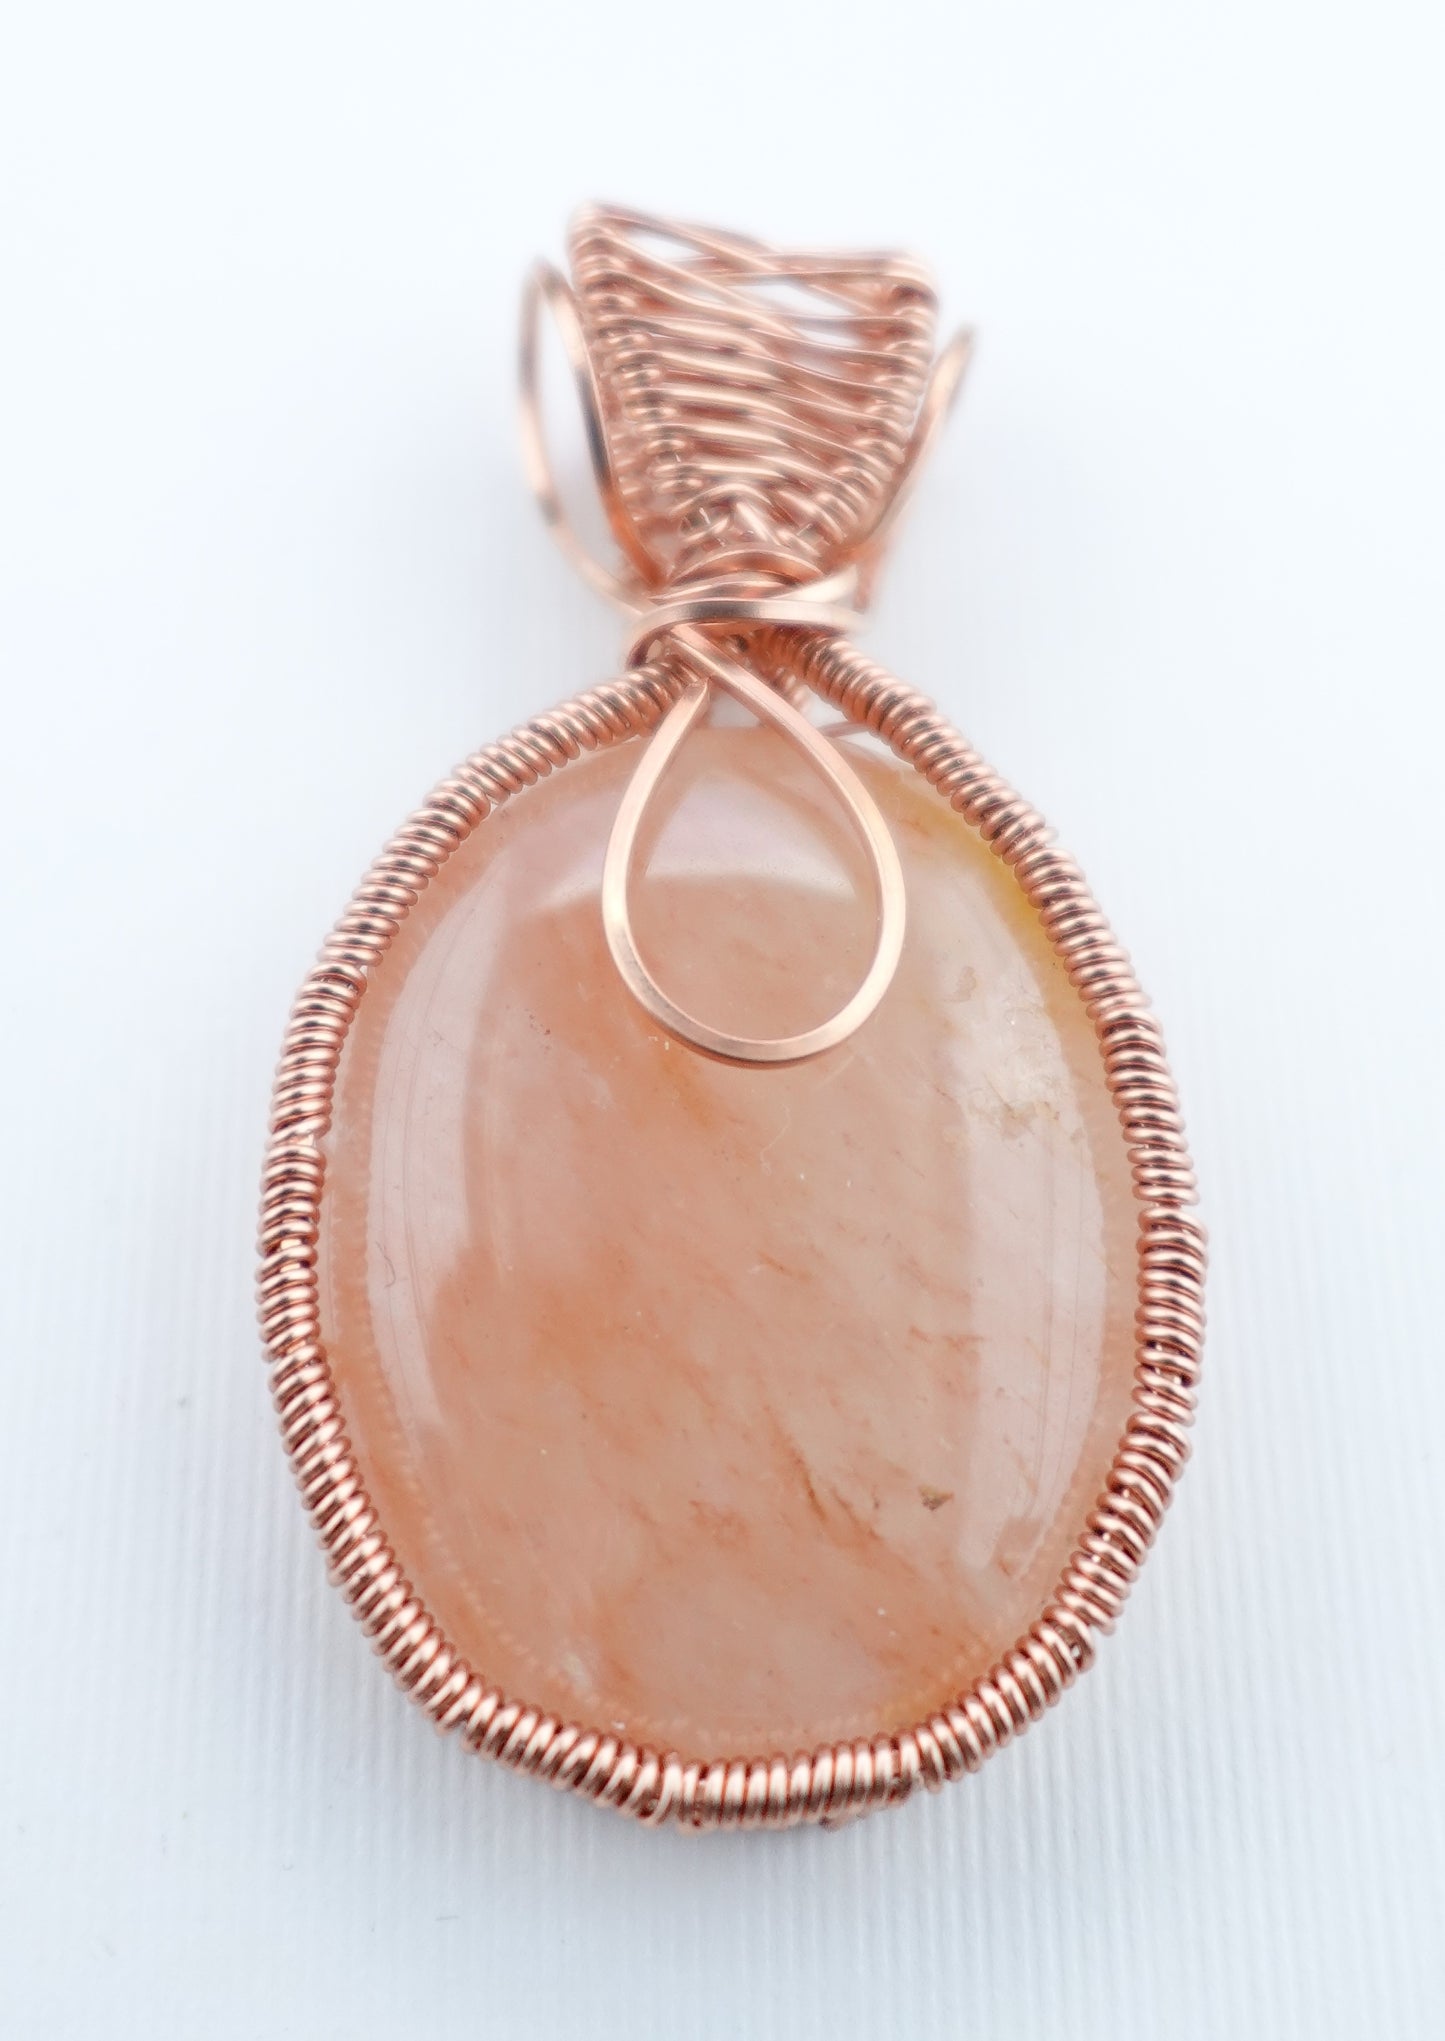 Oval Rose Quartz Worry Stone Pendant Wrapped in Copper Wire